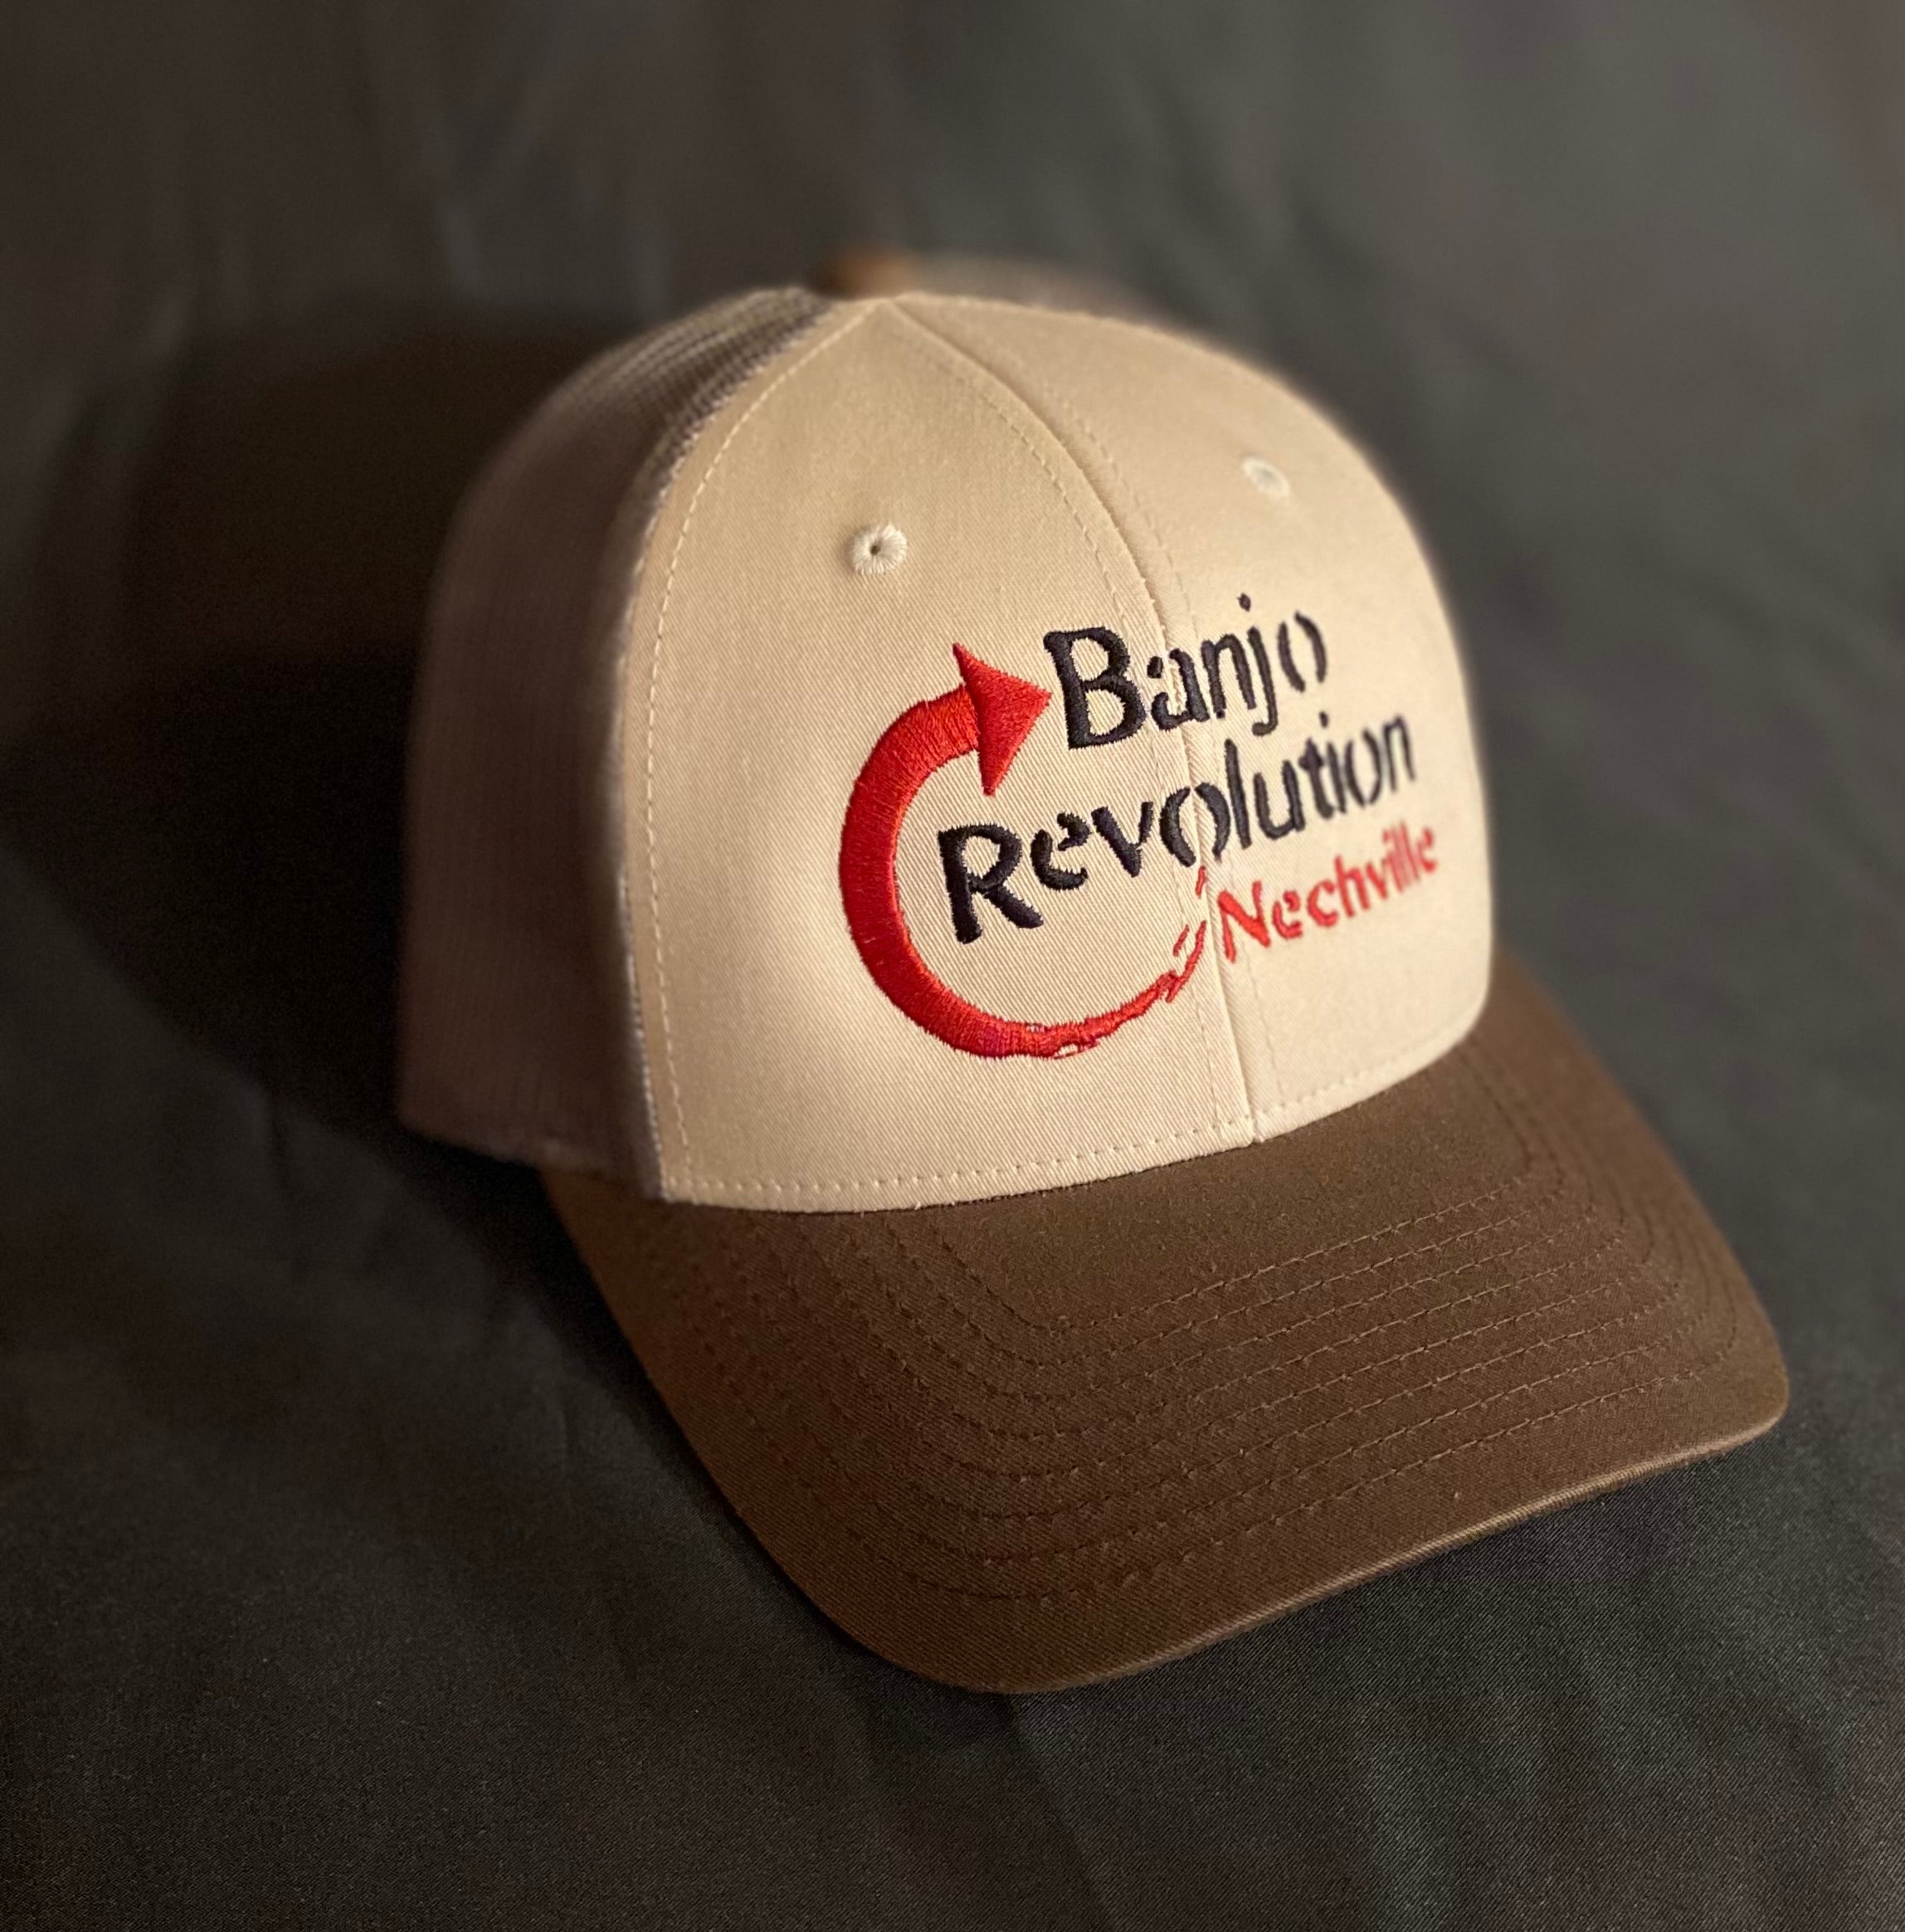 Banjo Rev Fitted Cap Tan curved Bill